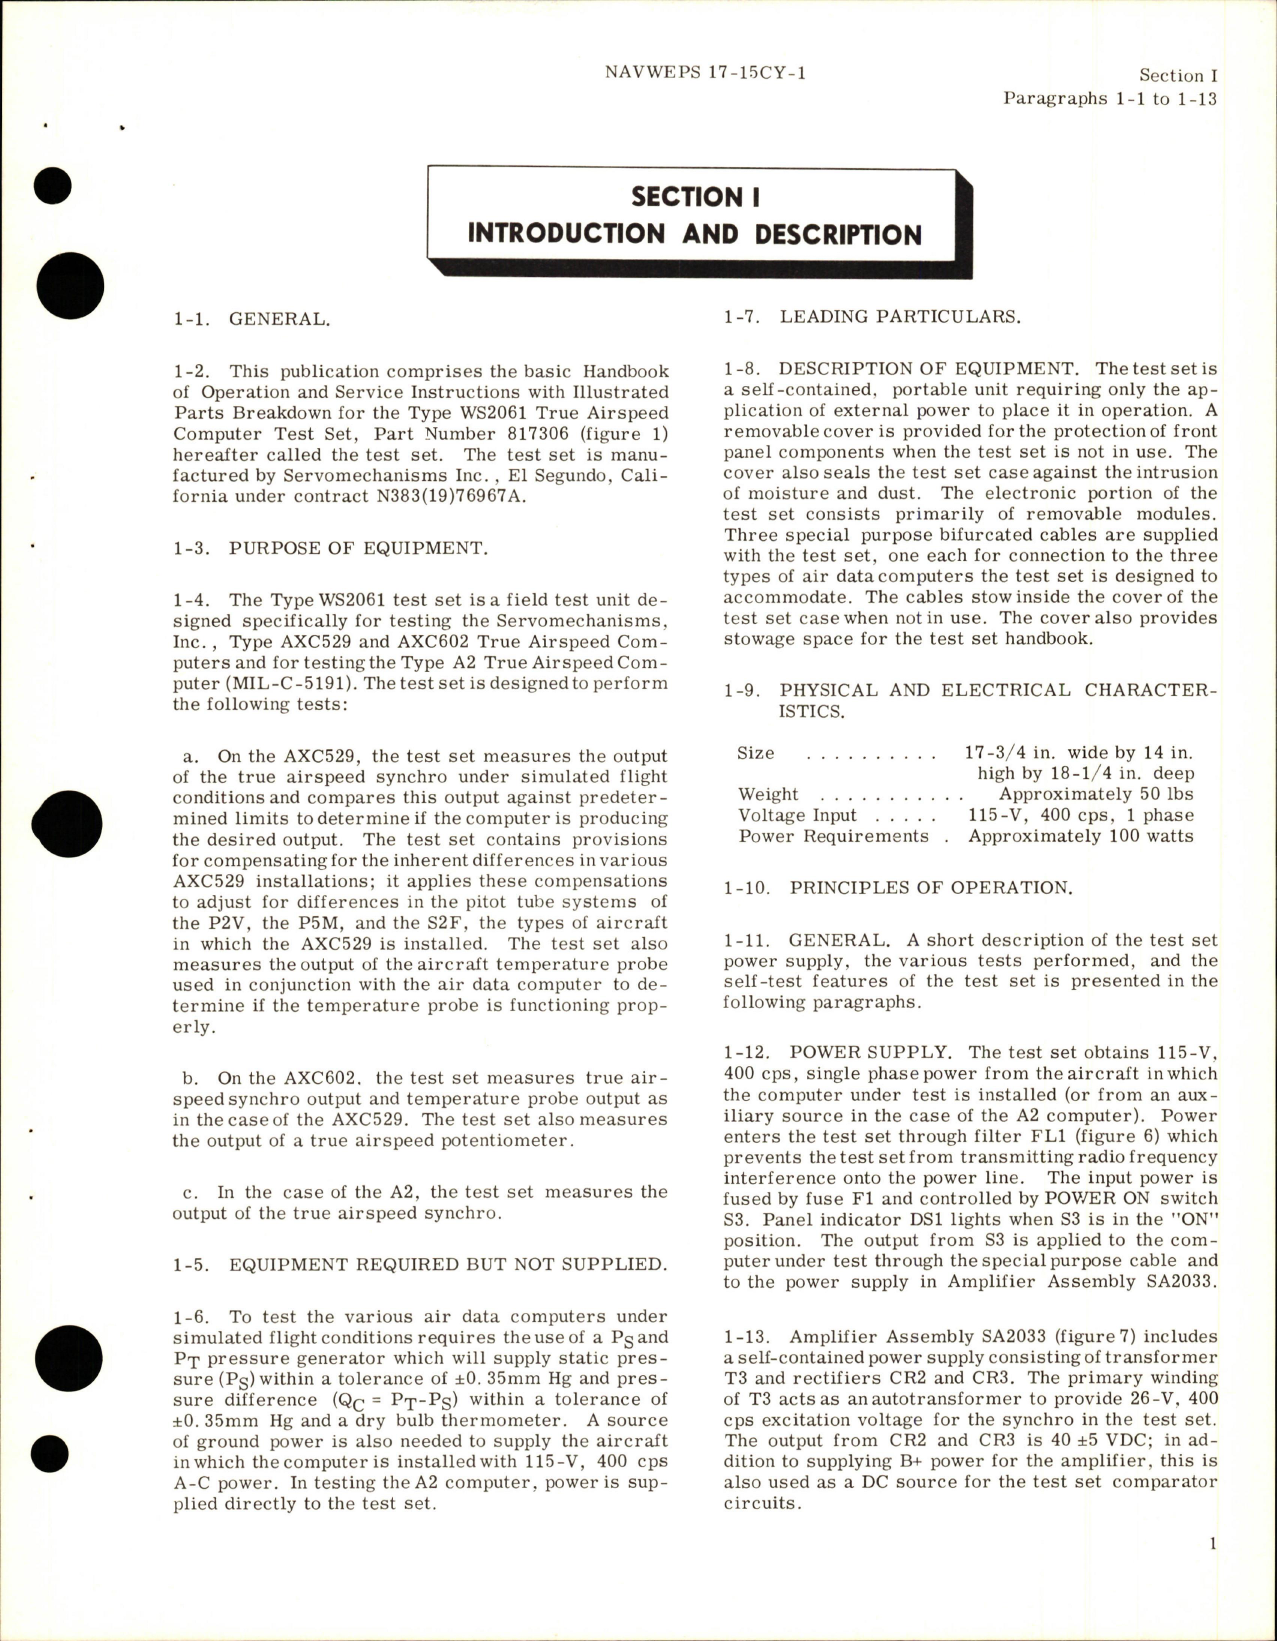 Sample page 5 from AirCorps Library document: Operation, Service Instructions and Illustrated Parts Breakdown for True Airspeed Computer Test Set - Type WS2061 - Part 817306